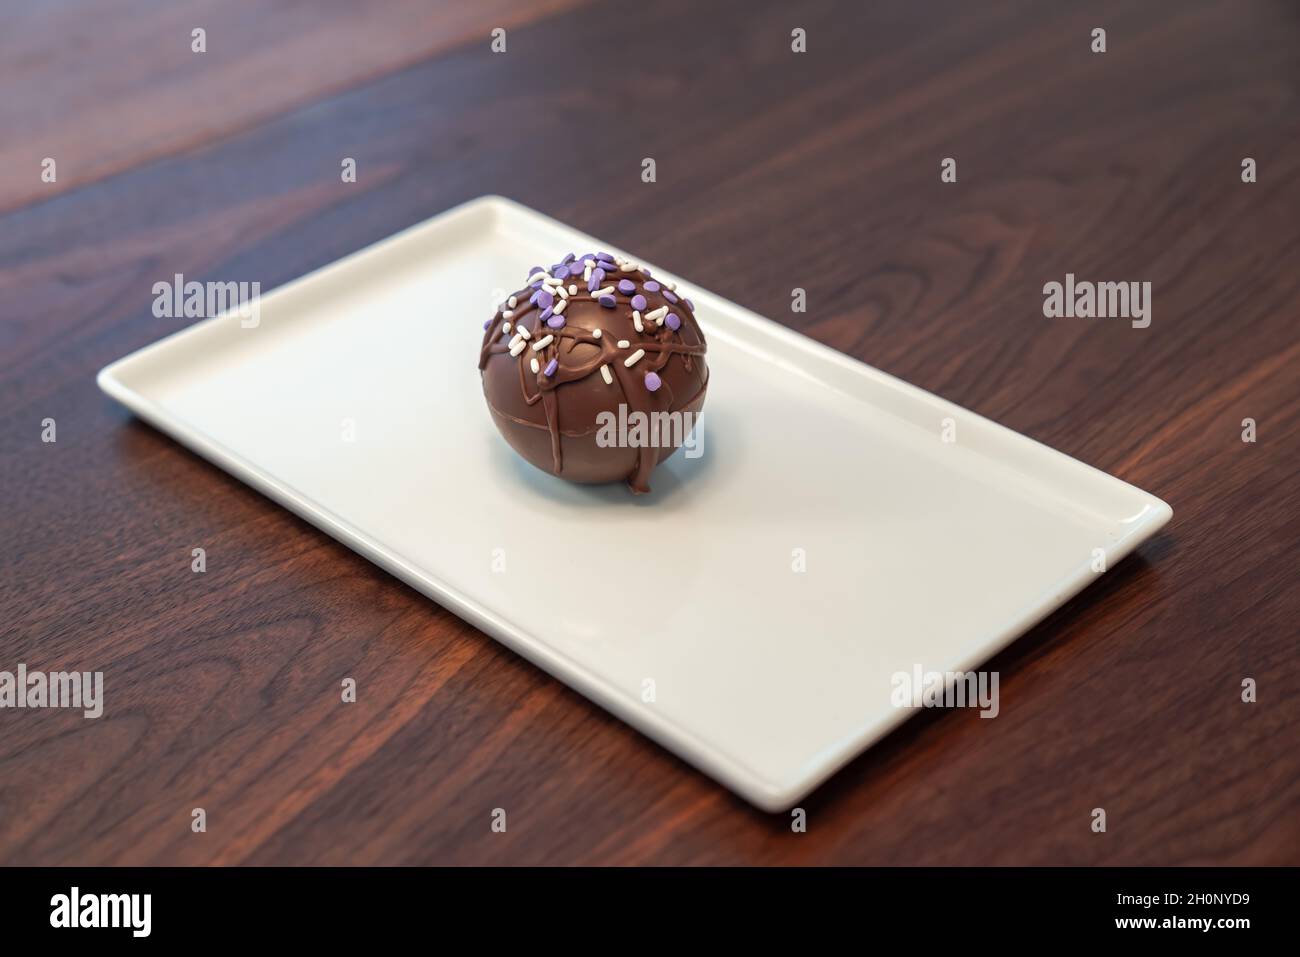 Food photograph of a single hot cocoa or chocolate bomb covered in drizzled brown chocolate and purple and white sprinkles set on a white serving plat Stock Photo